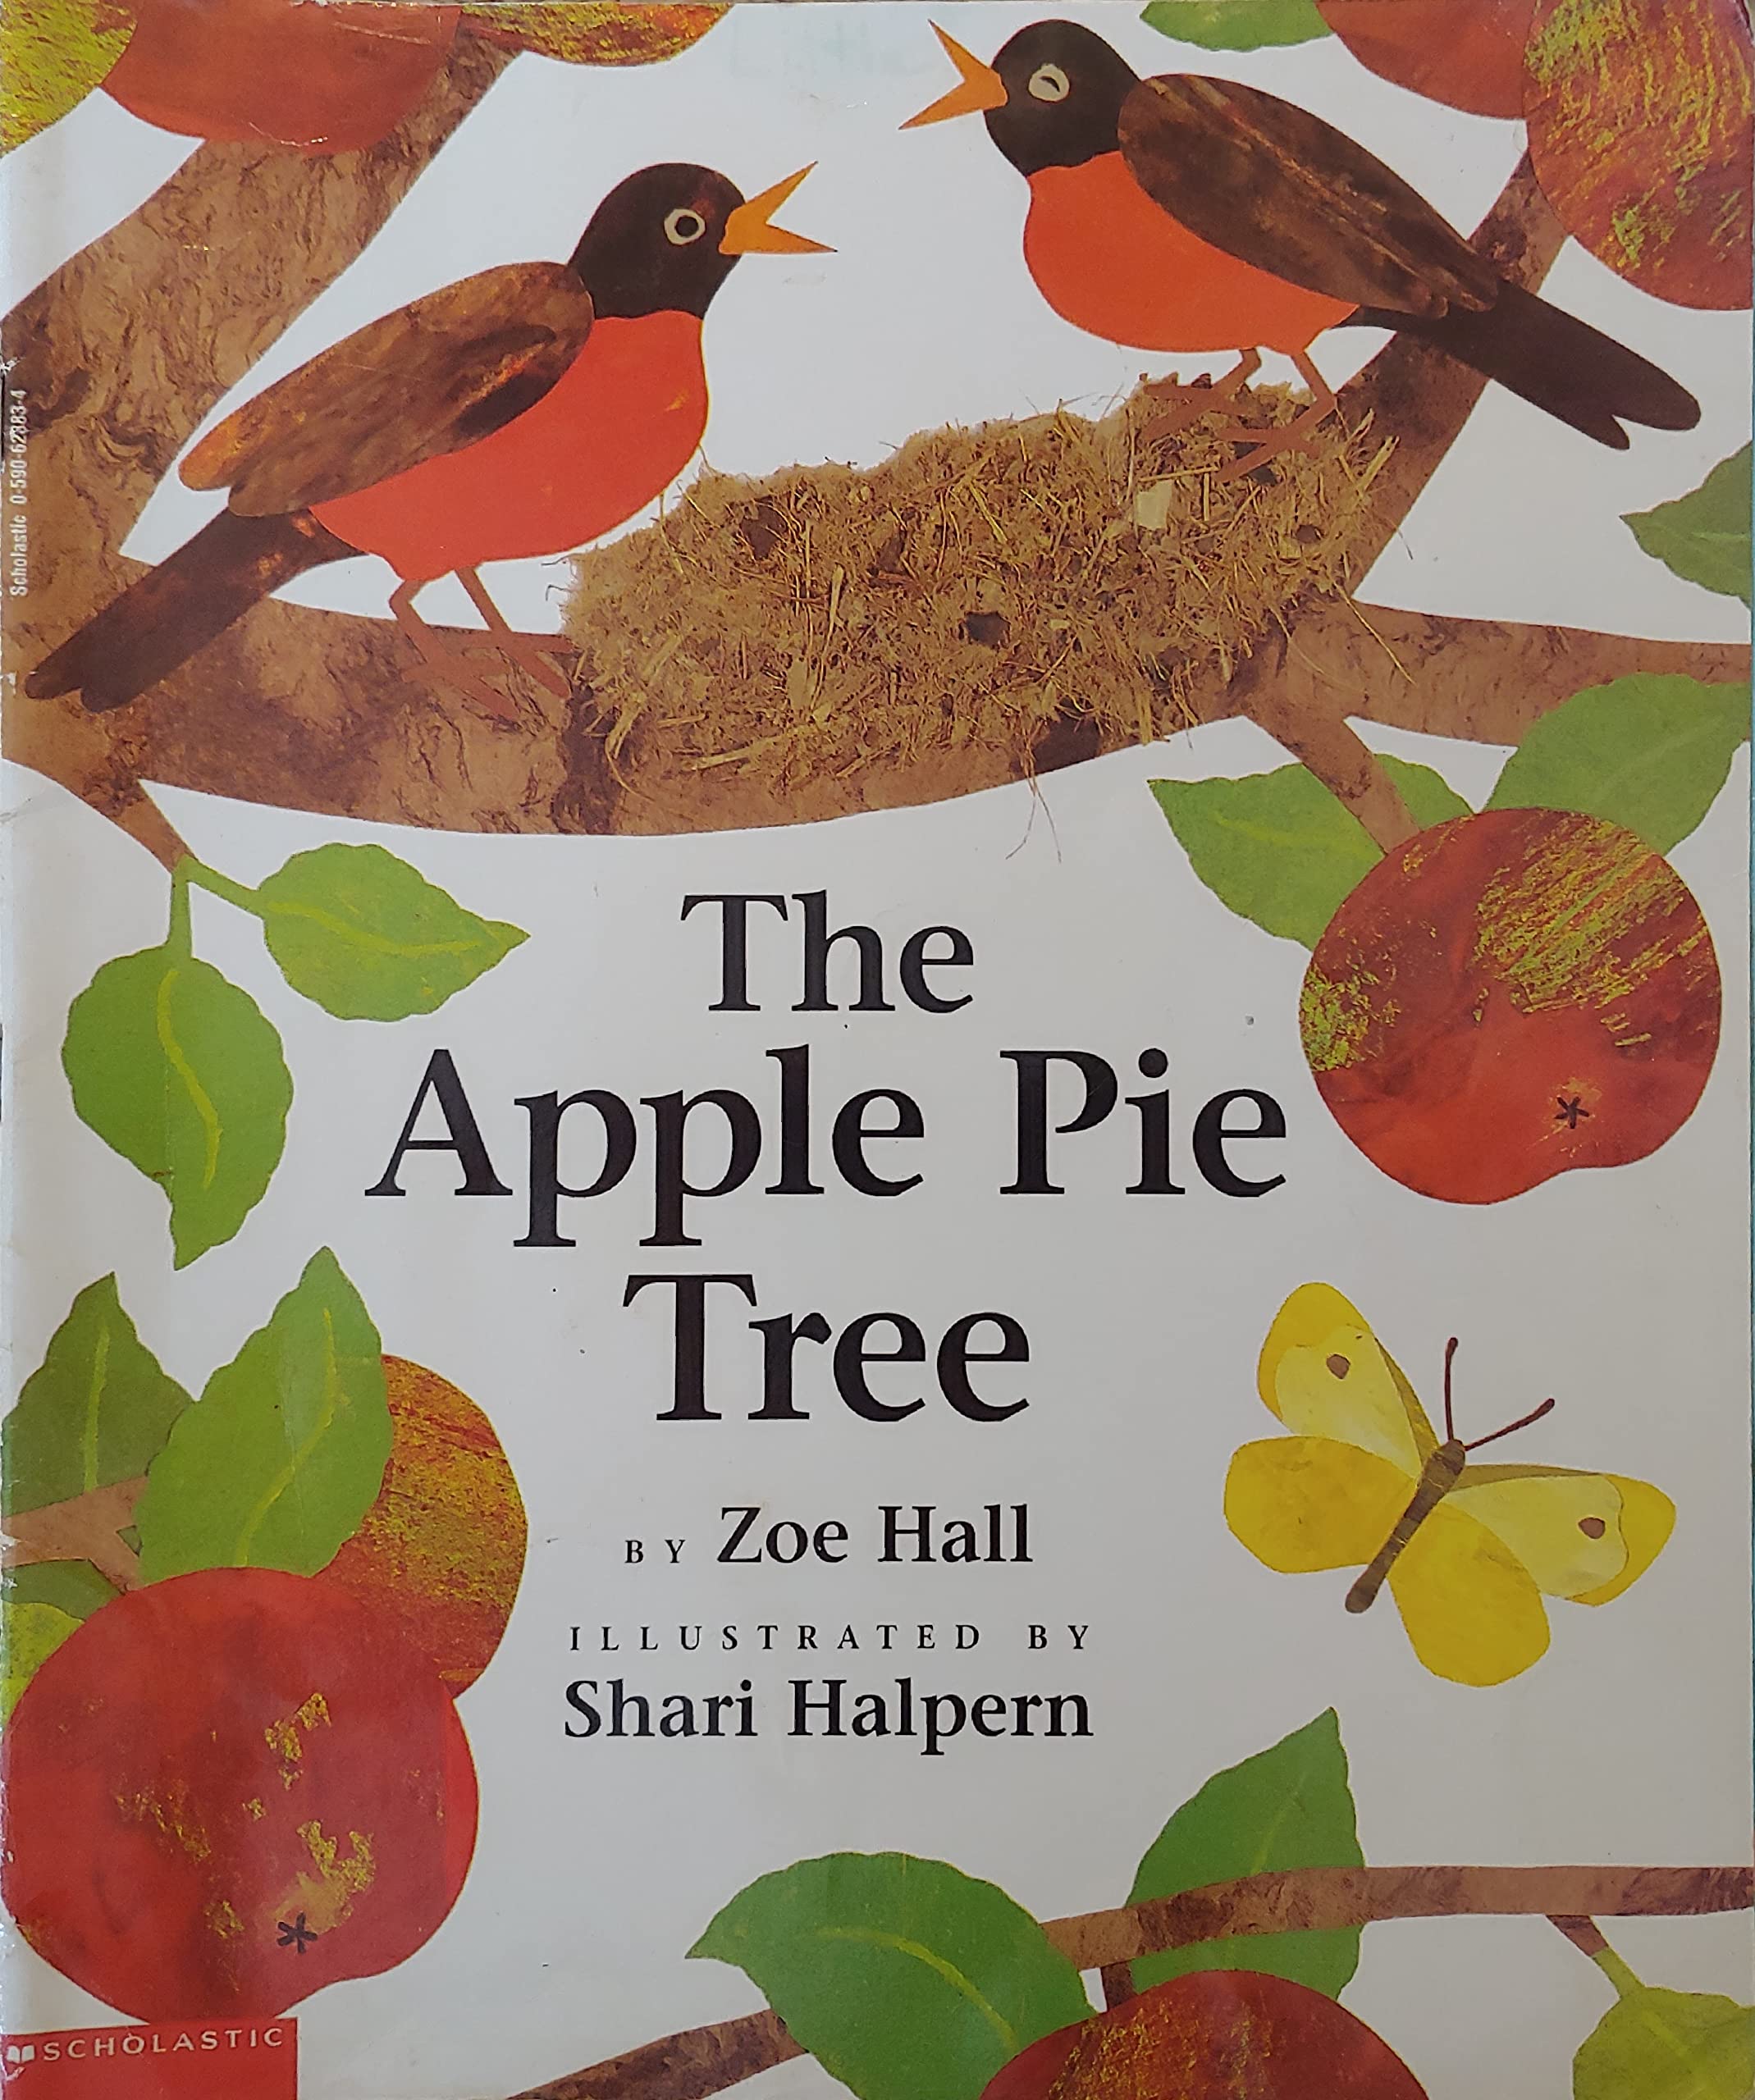 The Apple Pie Tree book cover